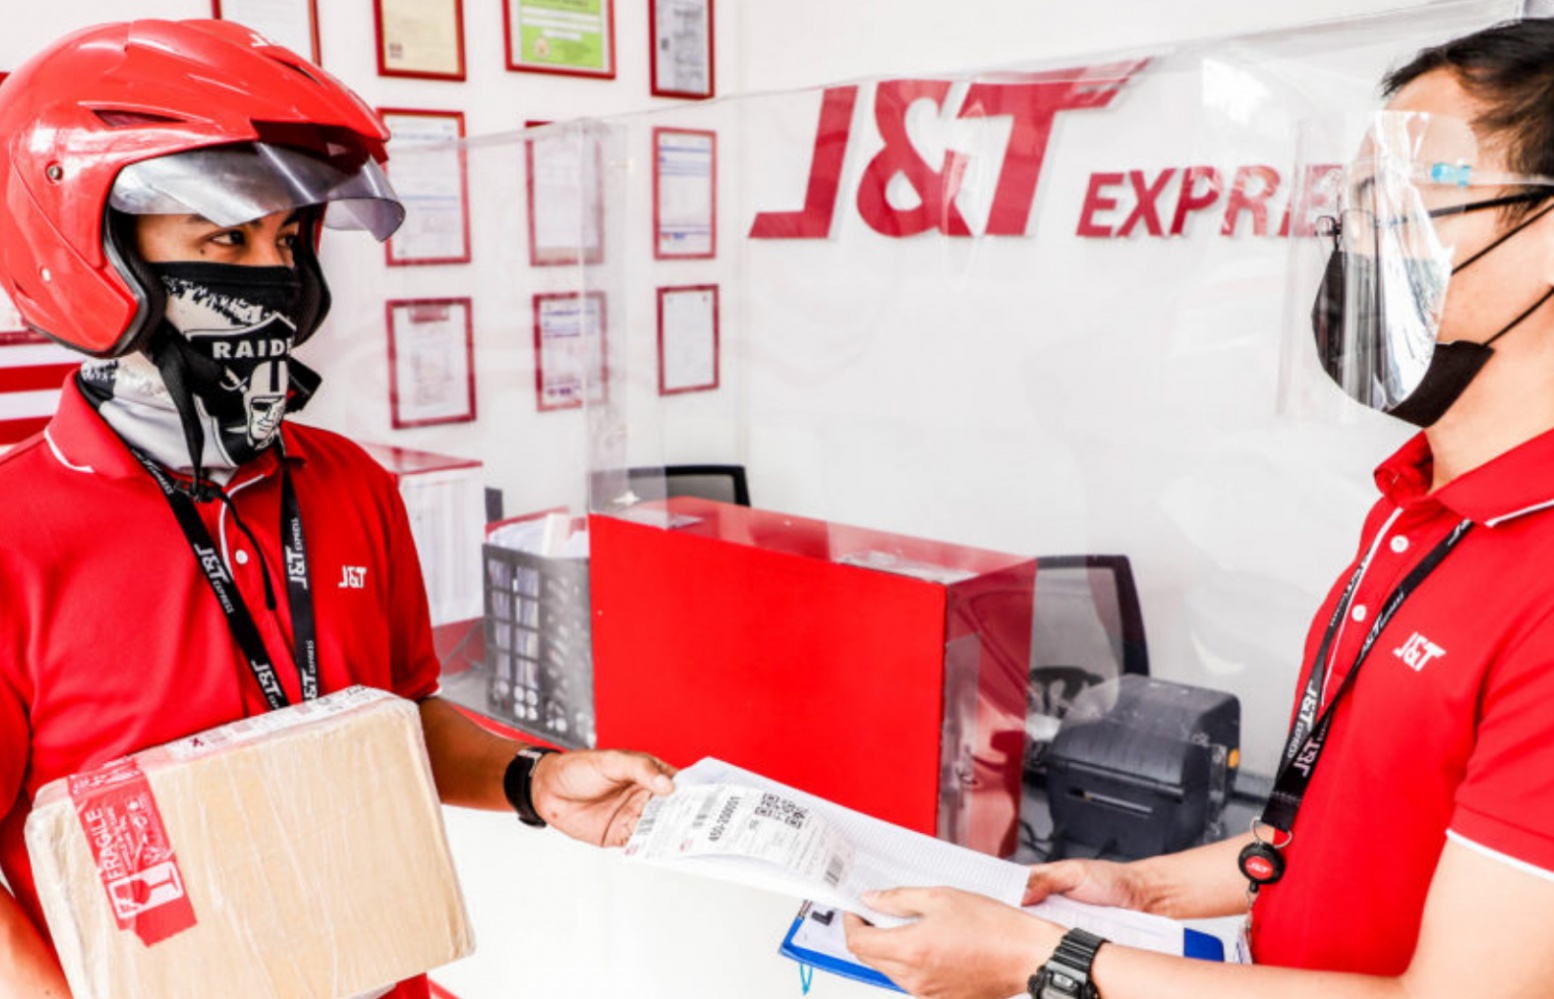 J&T Express secures $2 billion from a group of investors including Temasek